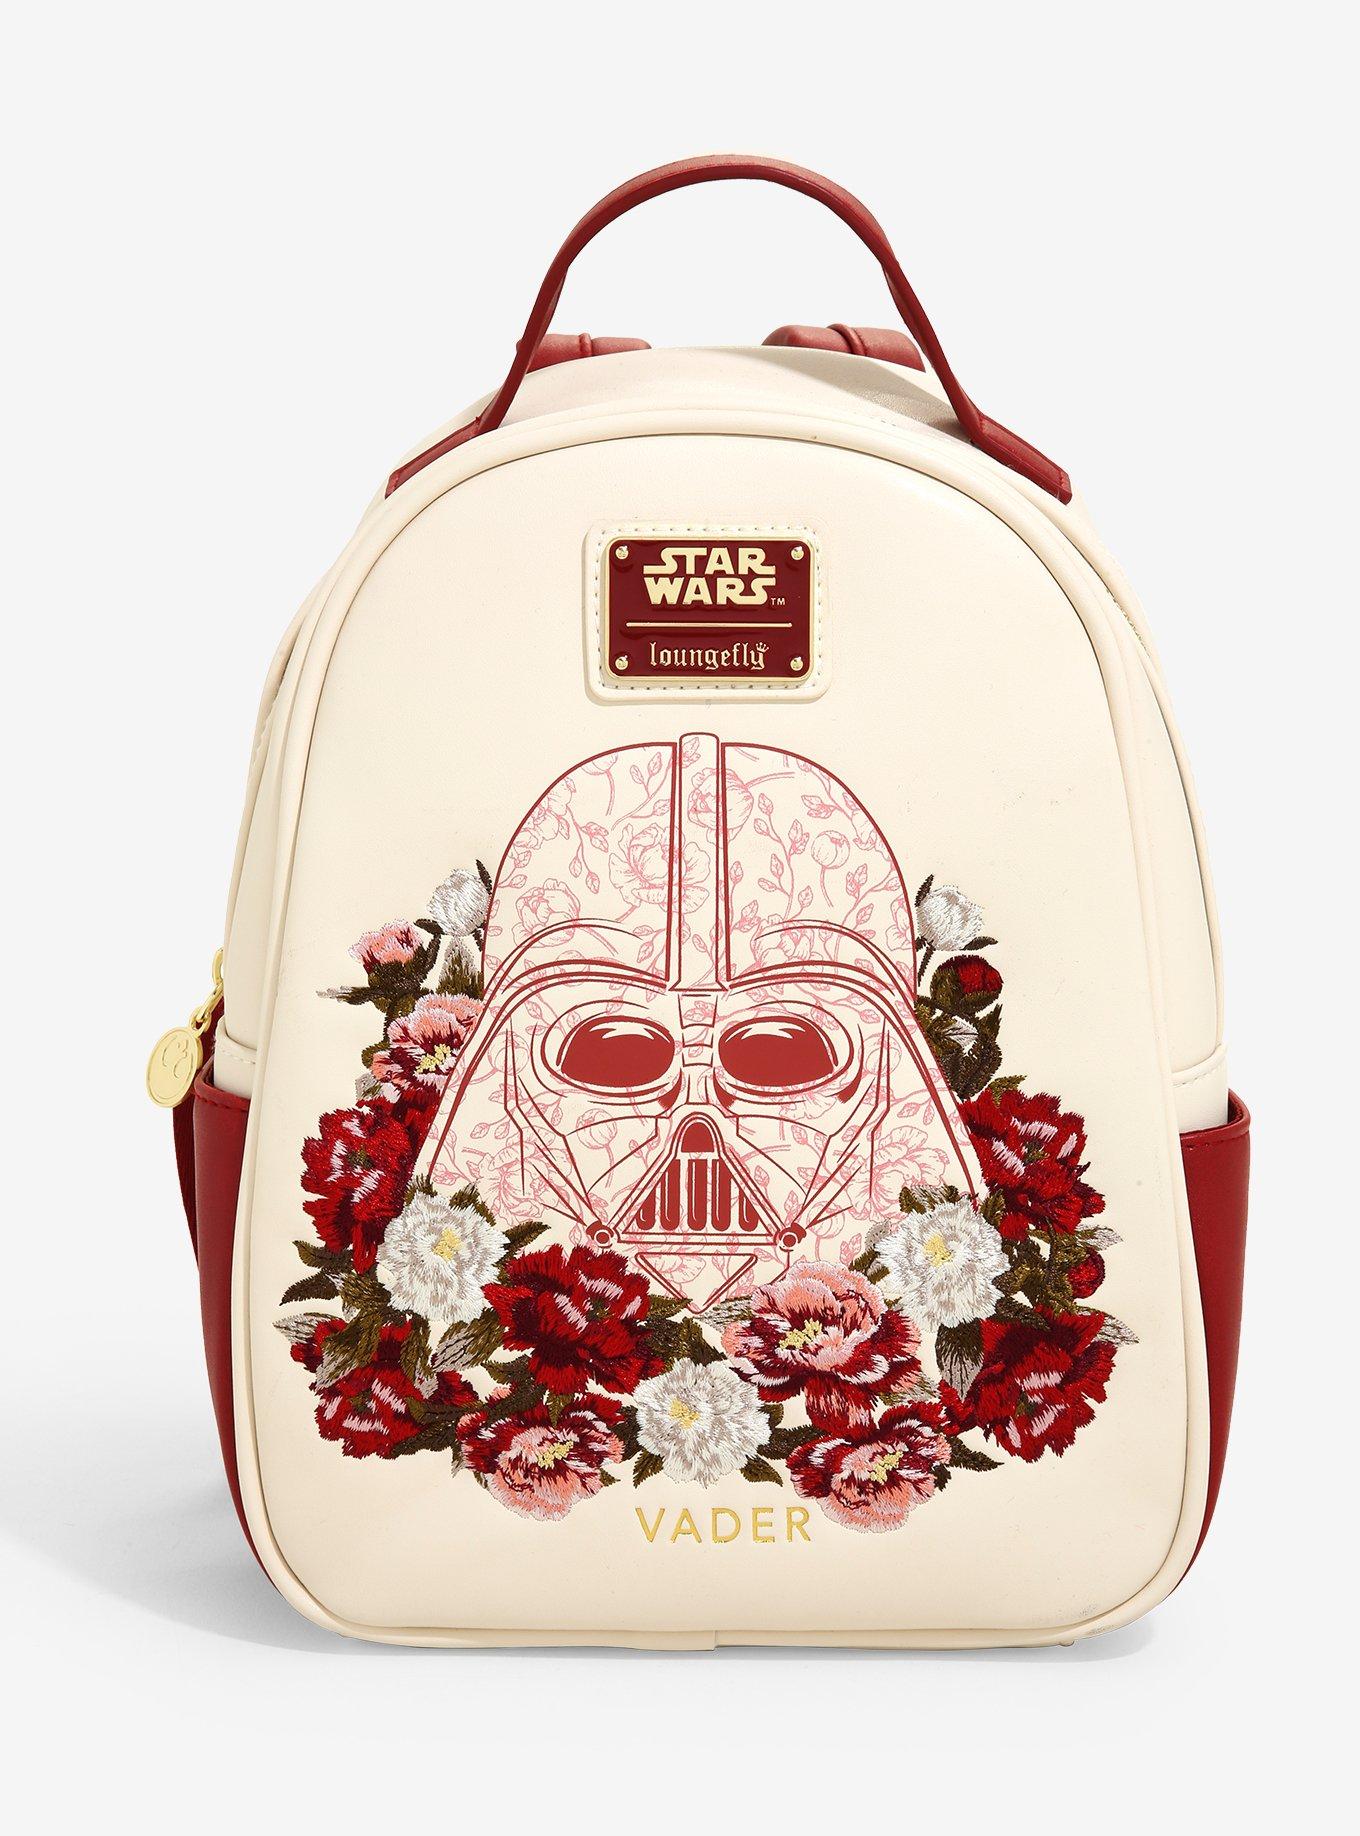 May the Style Be With You: New Star Wars Loungefly Bag 